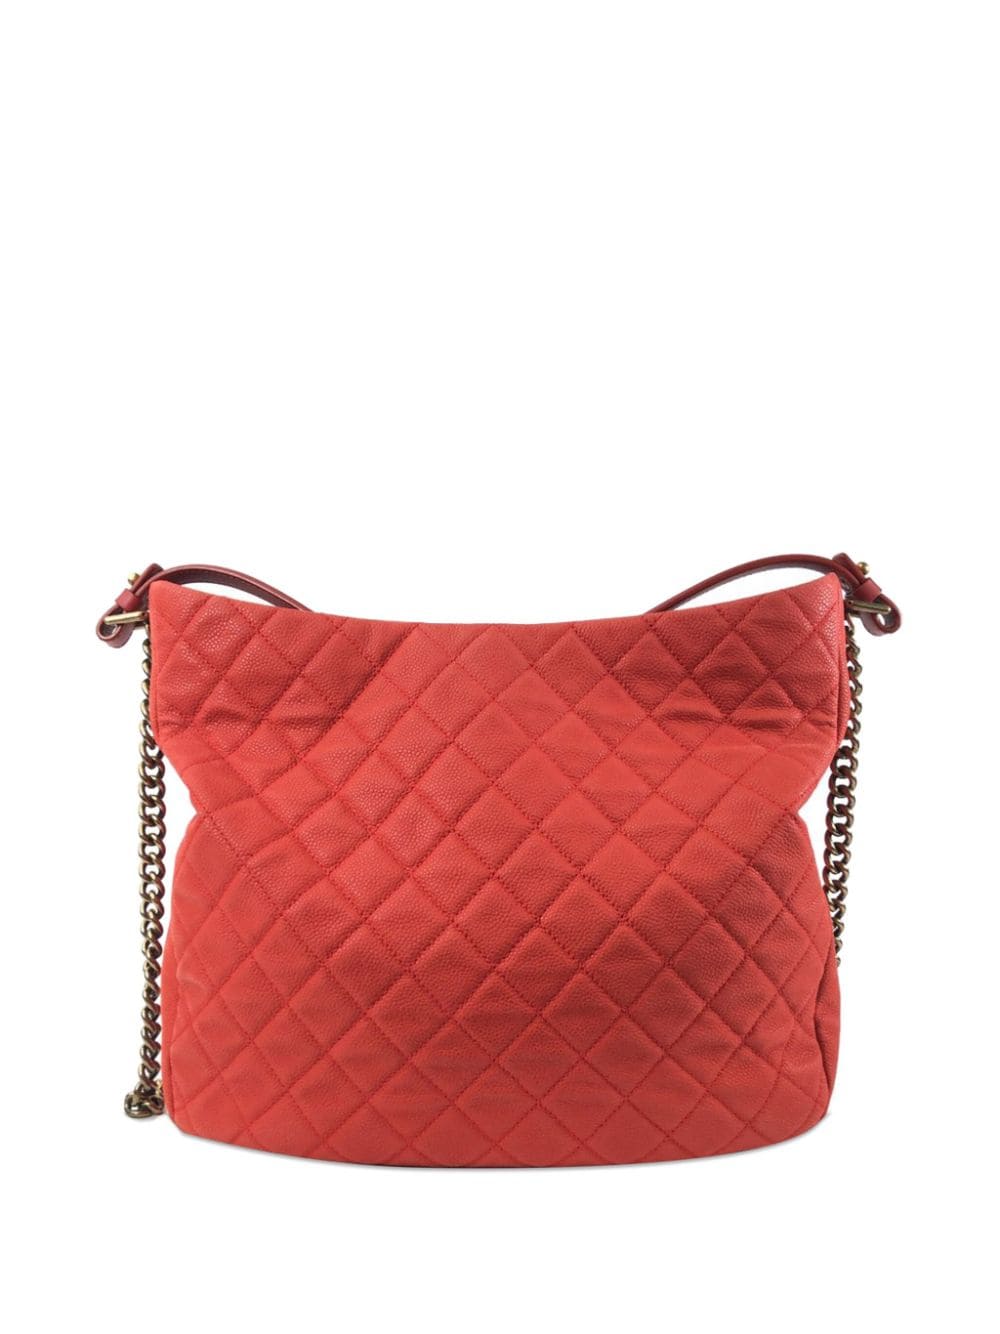 CHANEL Pre-Owned 2012-2013 Caviar Country Chic Hobo satchel - Rood